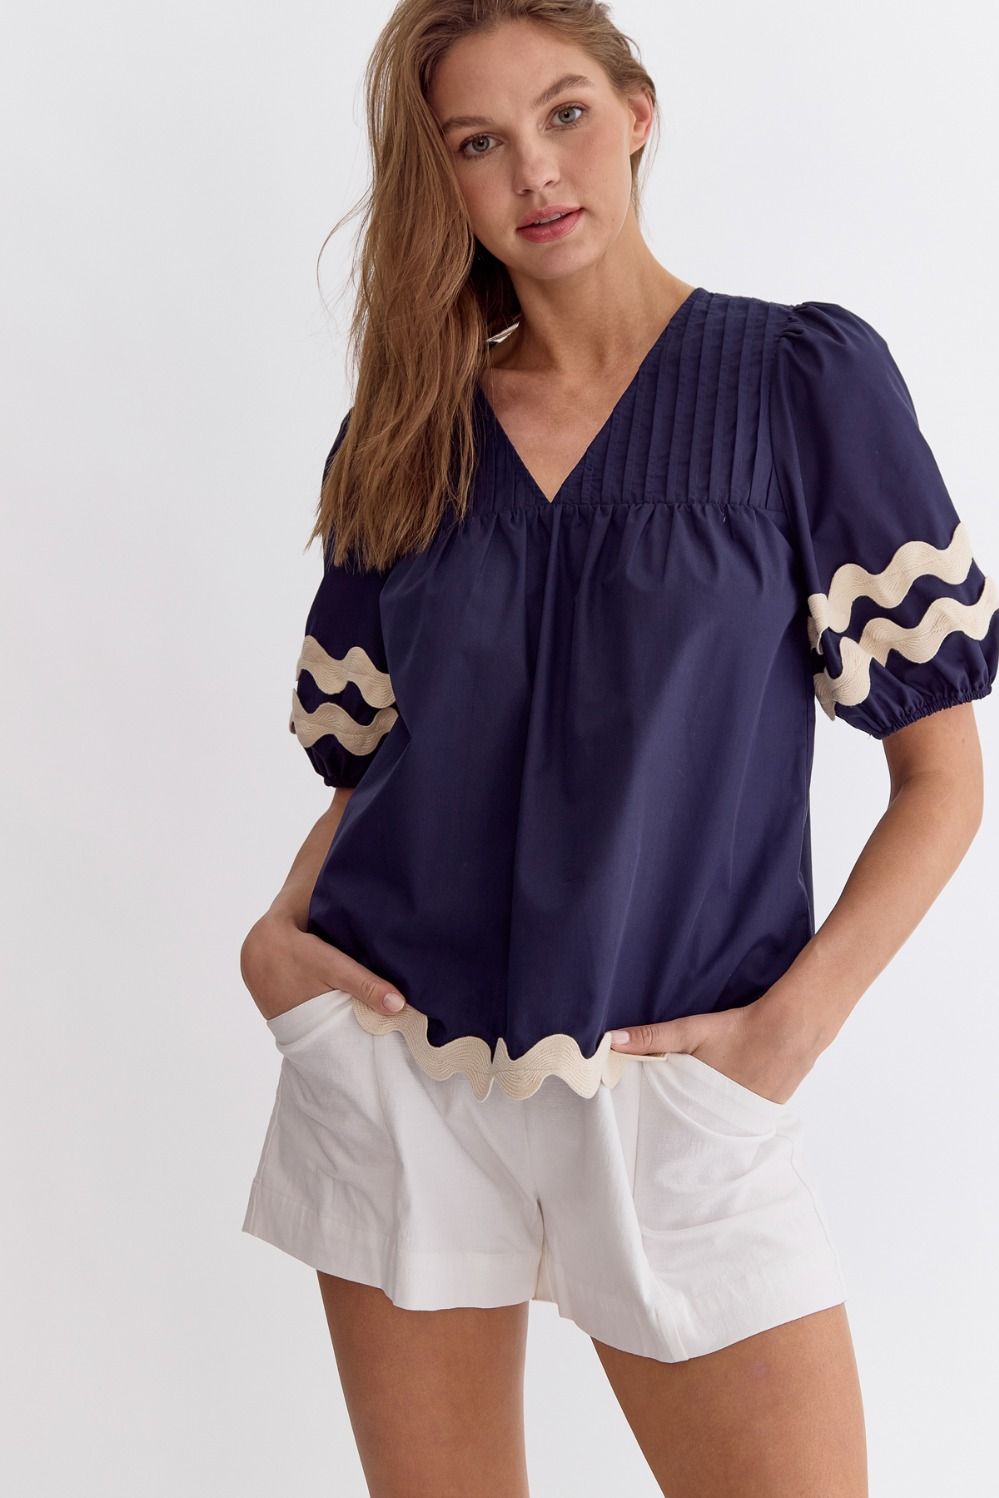 Navy Bubble Sleeve Top with Rick Rack Details